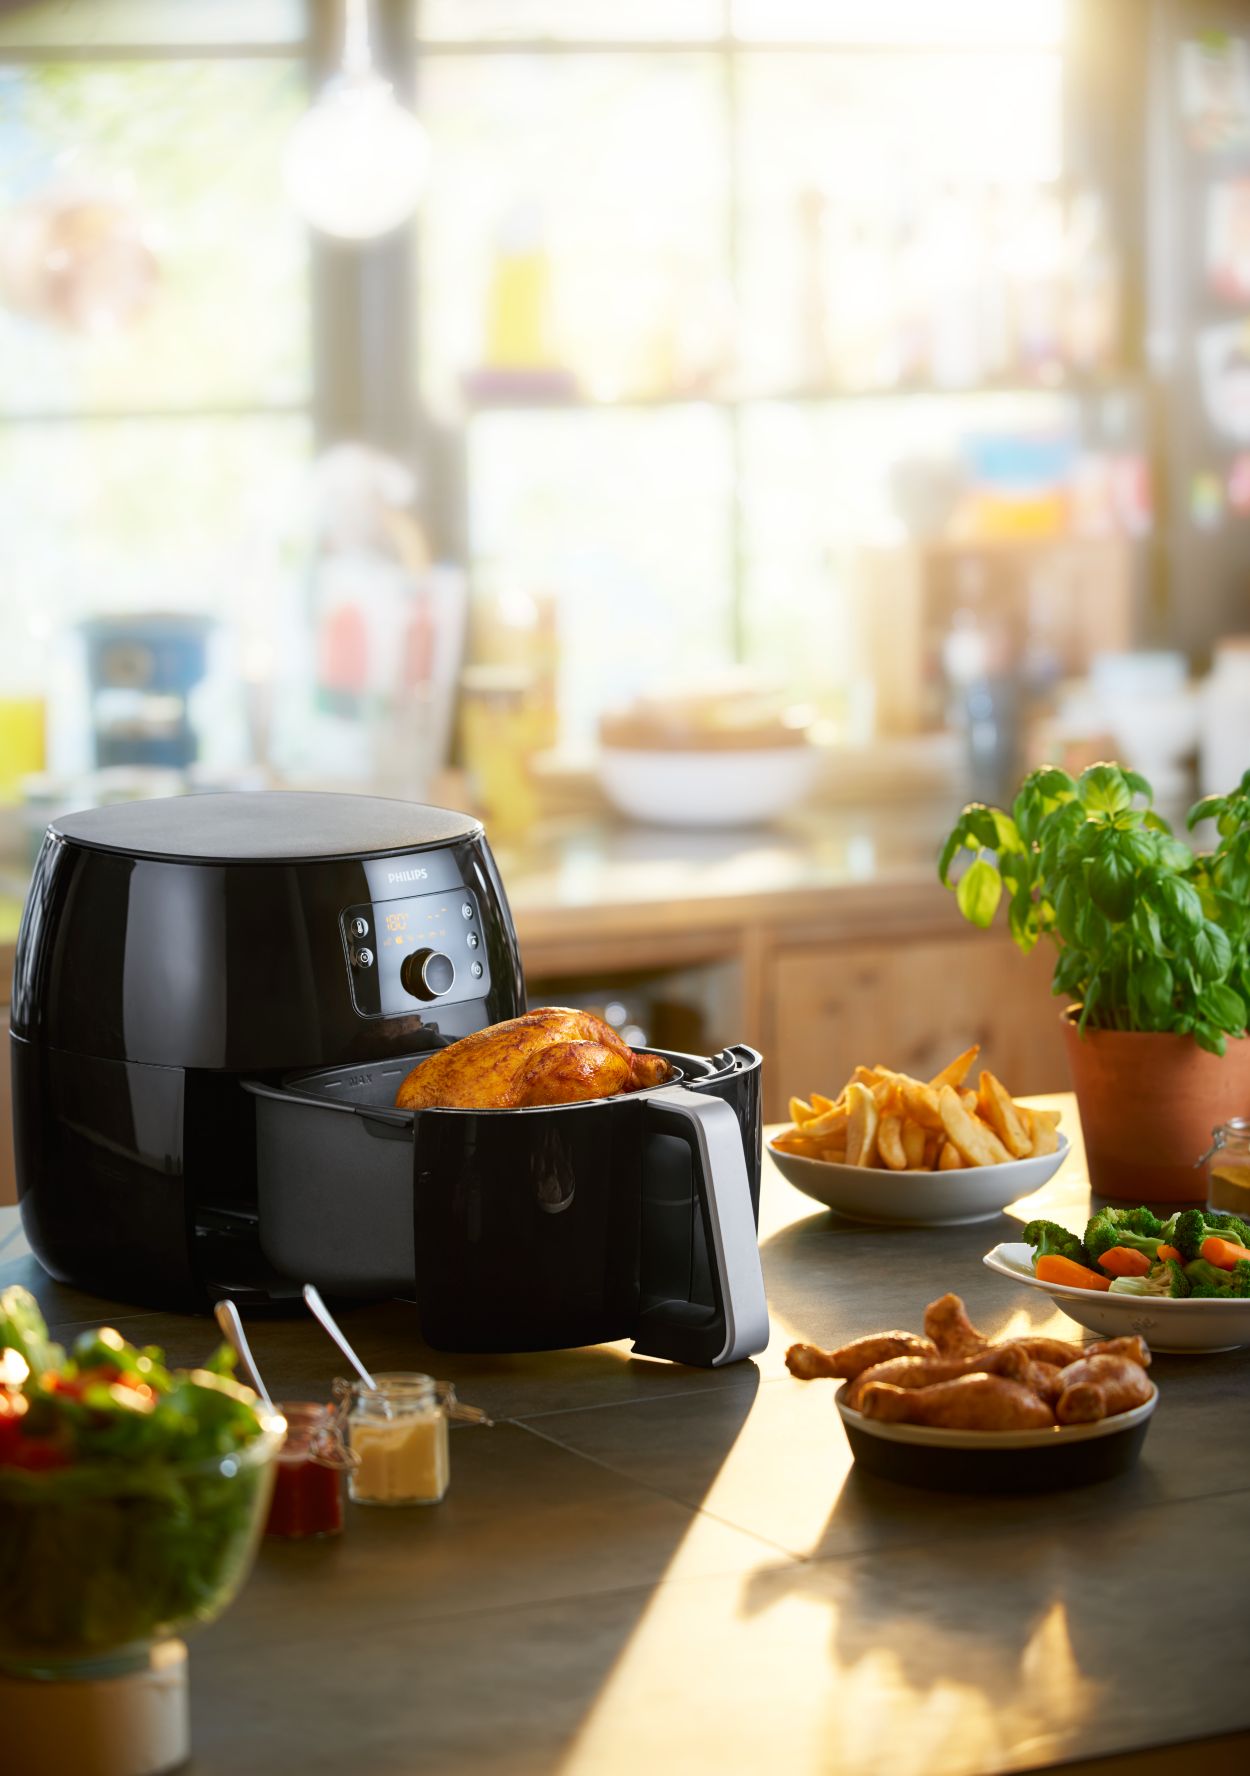 Unboxing and review of Philips Airfryer XXL HD9650/96 